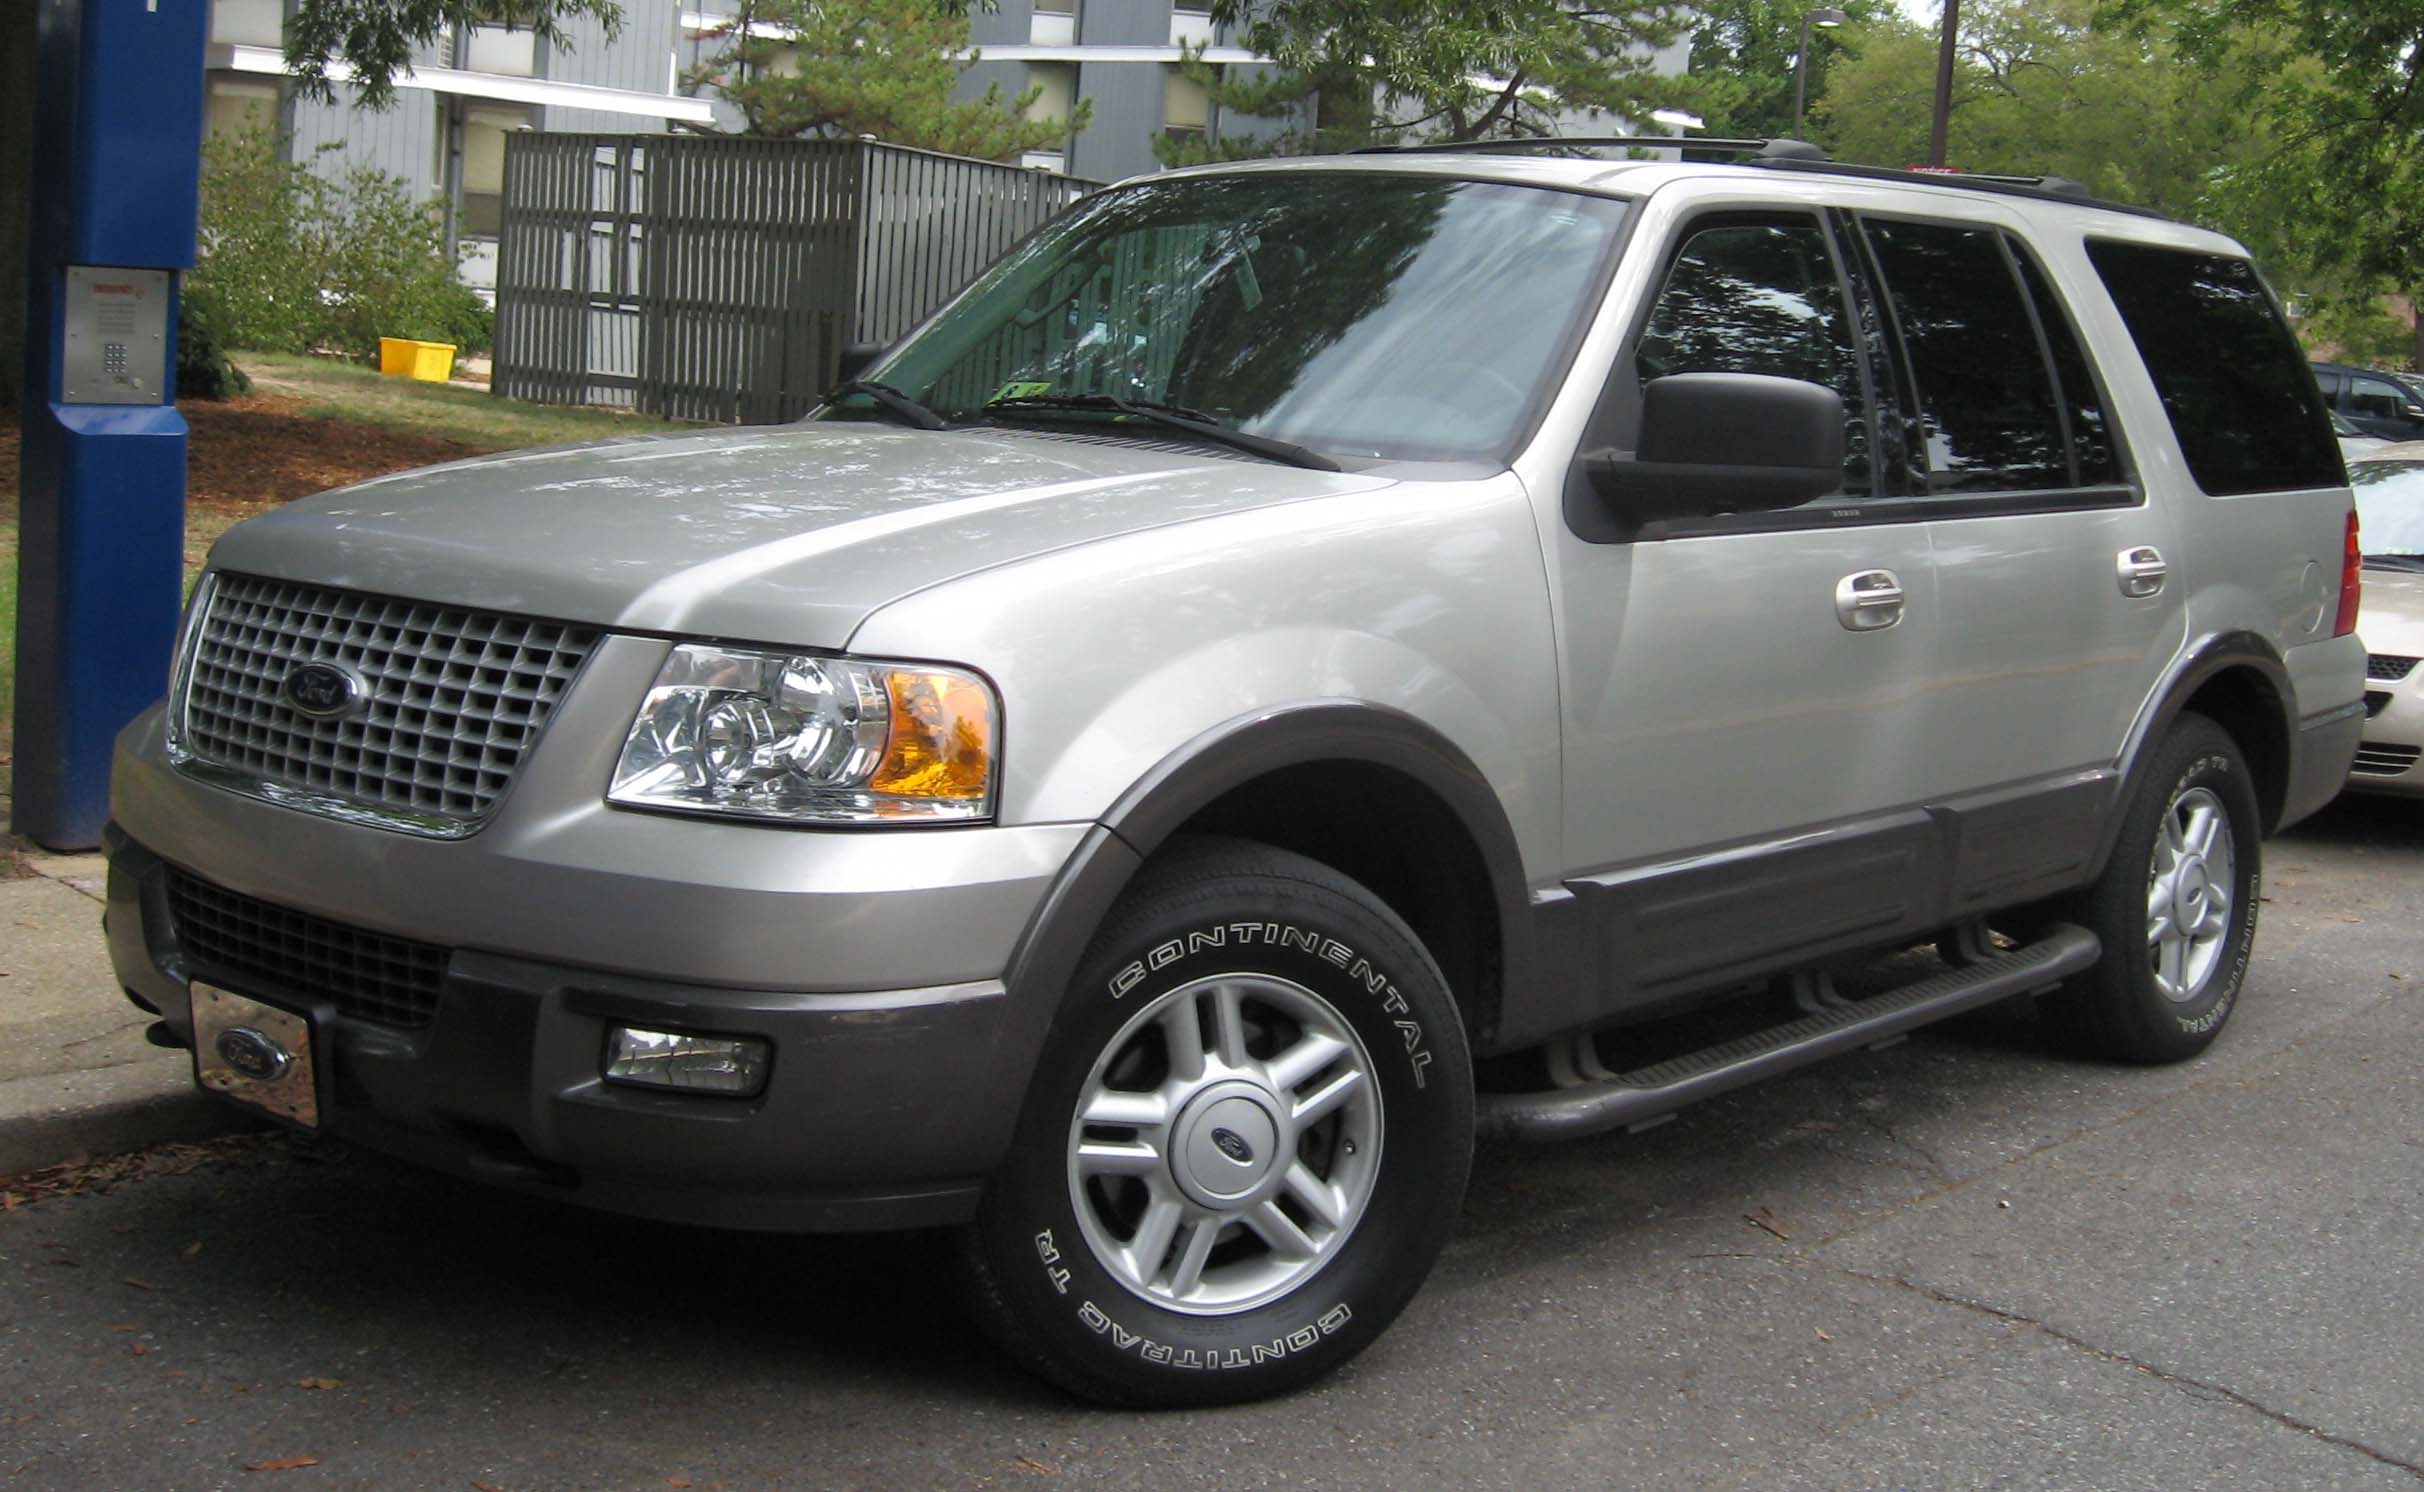 2003 Ford expedition dimensions #3